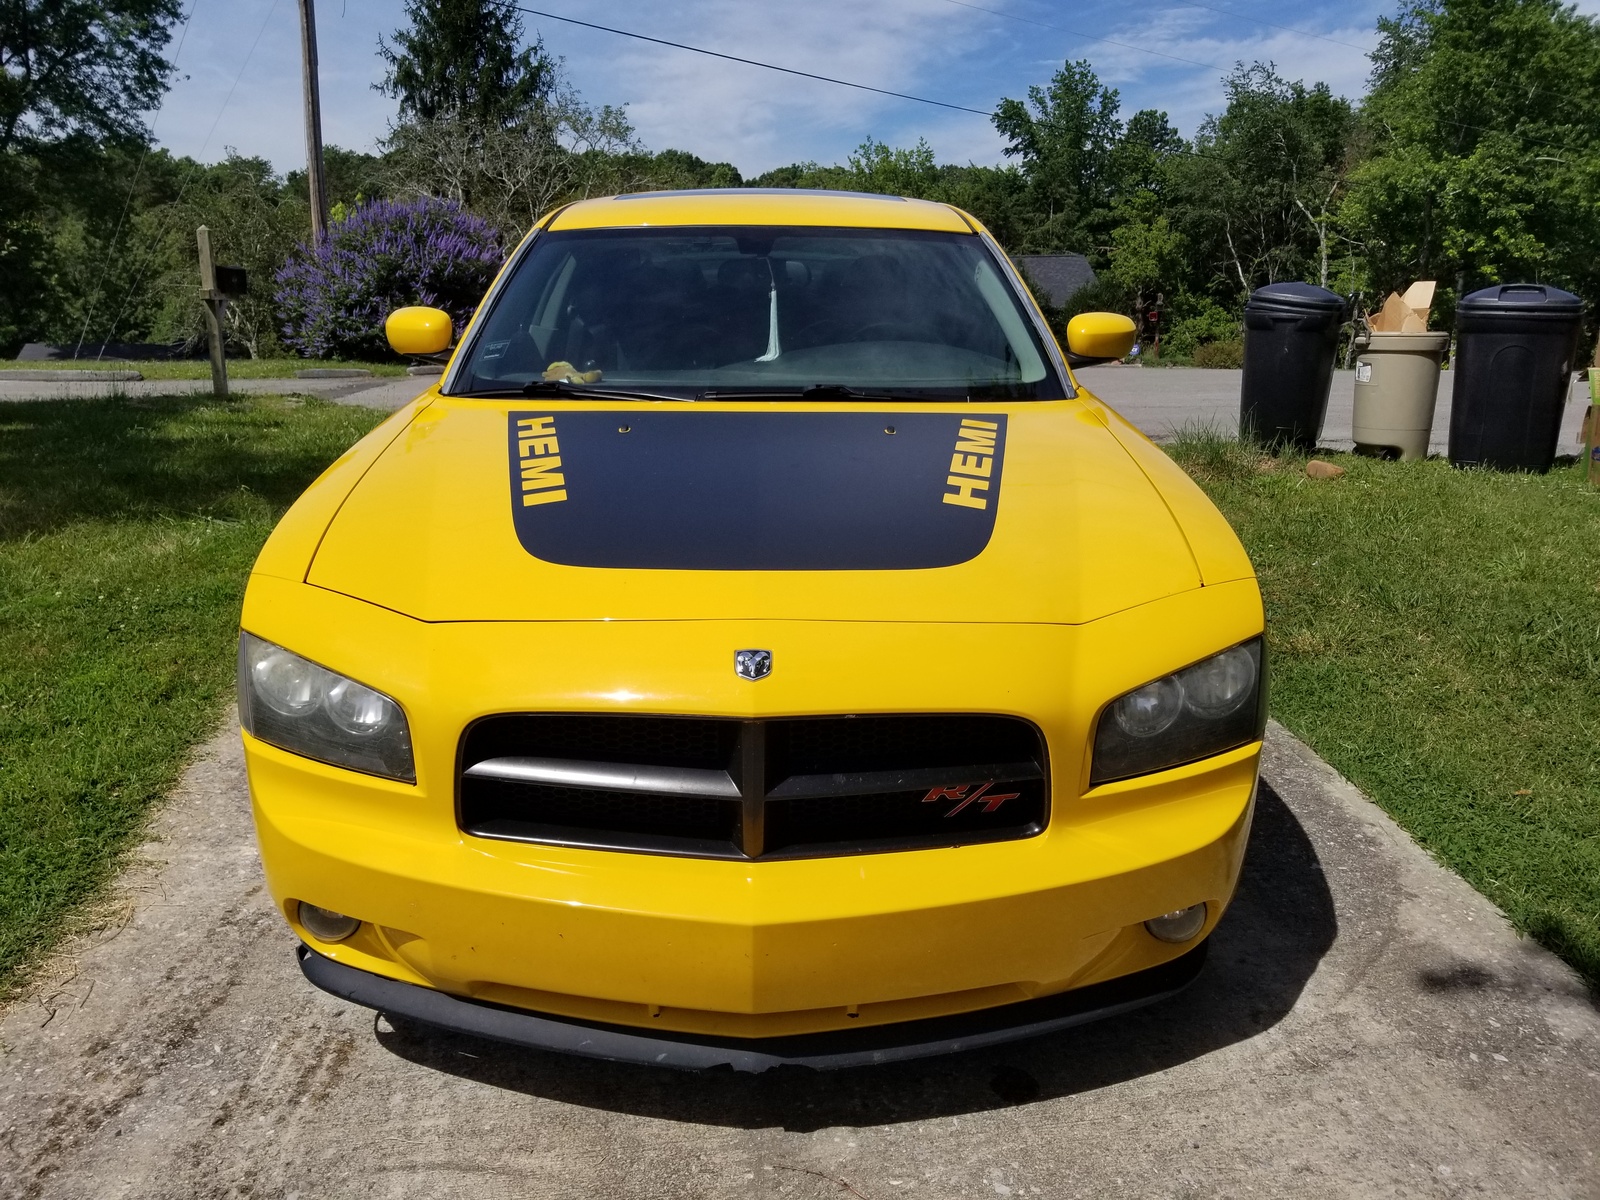 2006 Dodge Charger: Prices, Reviews & Pictures - CarGurus